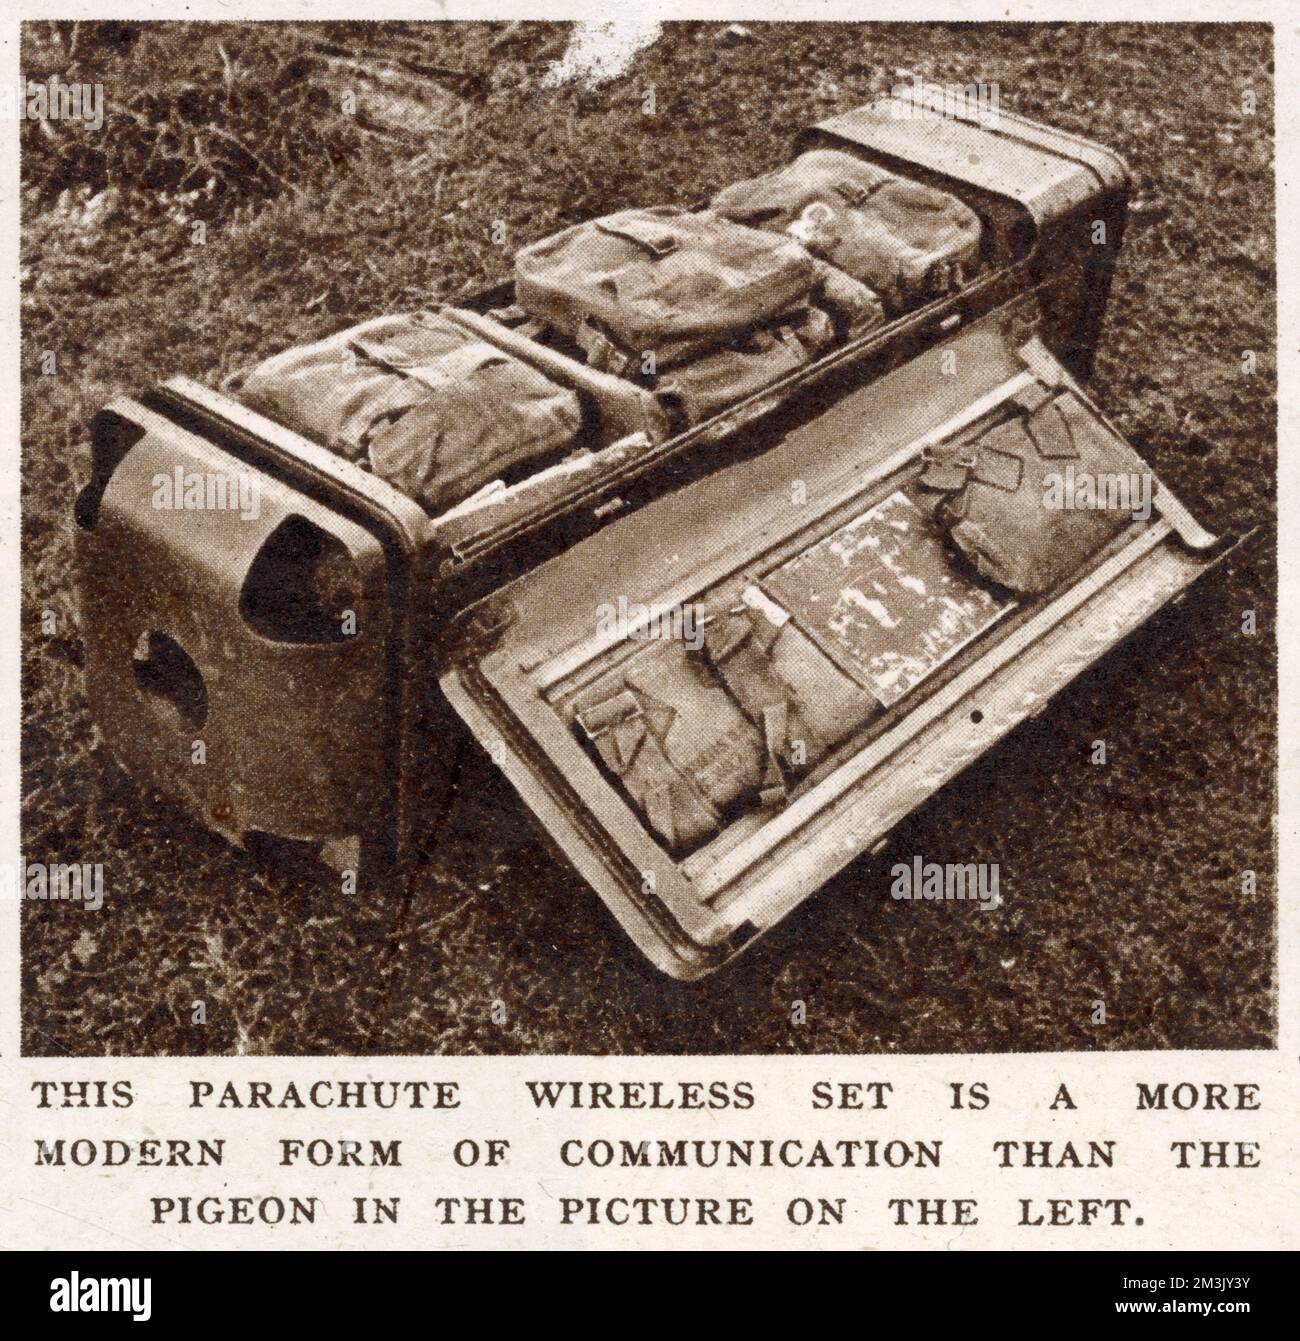 A Number 56 type radio set, packed in its parachute container, as used by the British Airborne Forces, 1944.  Equipment such as this was used in Operation 'Market Garden', by the British First Airborne Division, at Arnhem in Holland. Stock Photo